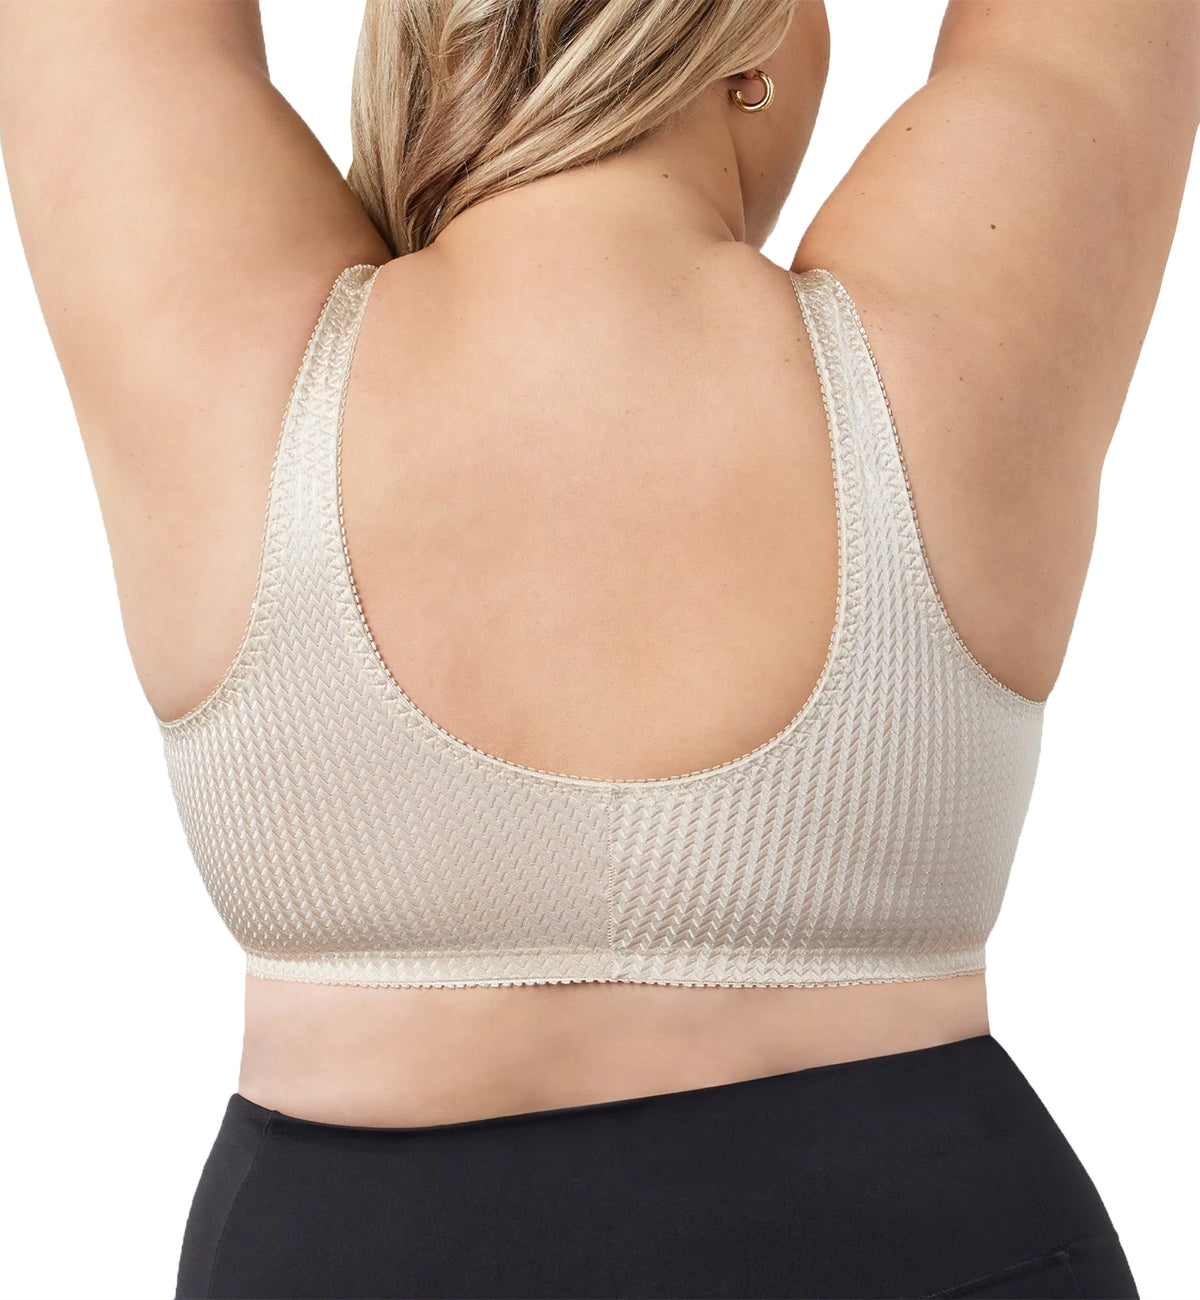 Leading Lady Plus Size Front Hook Wirefree Leisure Bra White,48 Dd